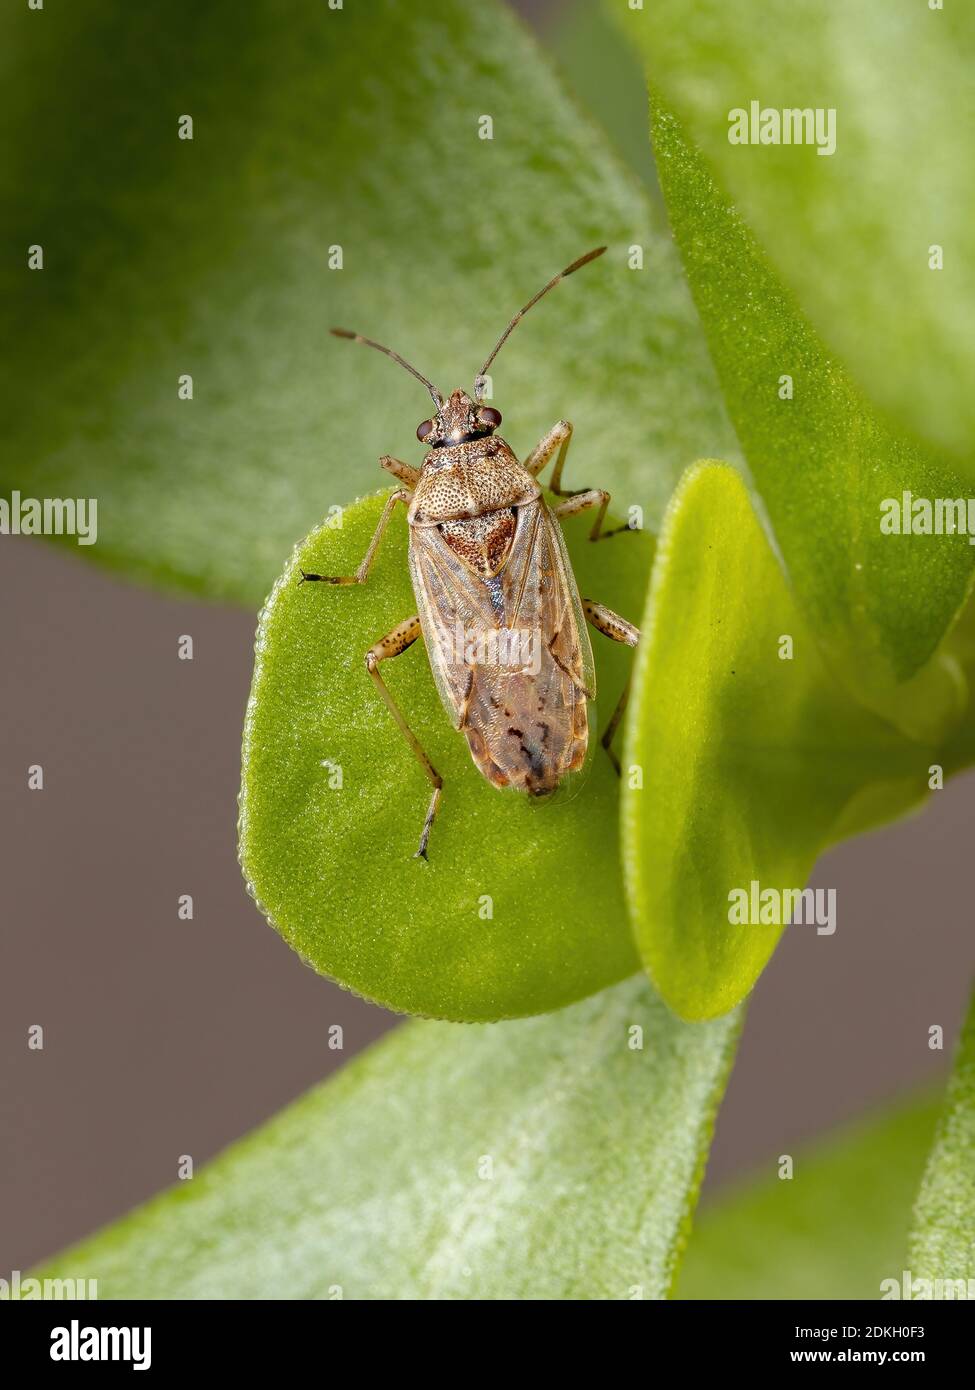 Adult Seed bug of the Subfamily Orsillinae on a Common Purslane plant of the species Portulaca oleracea Stock Photo